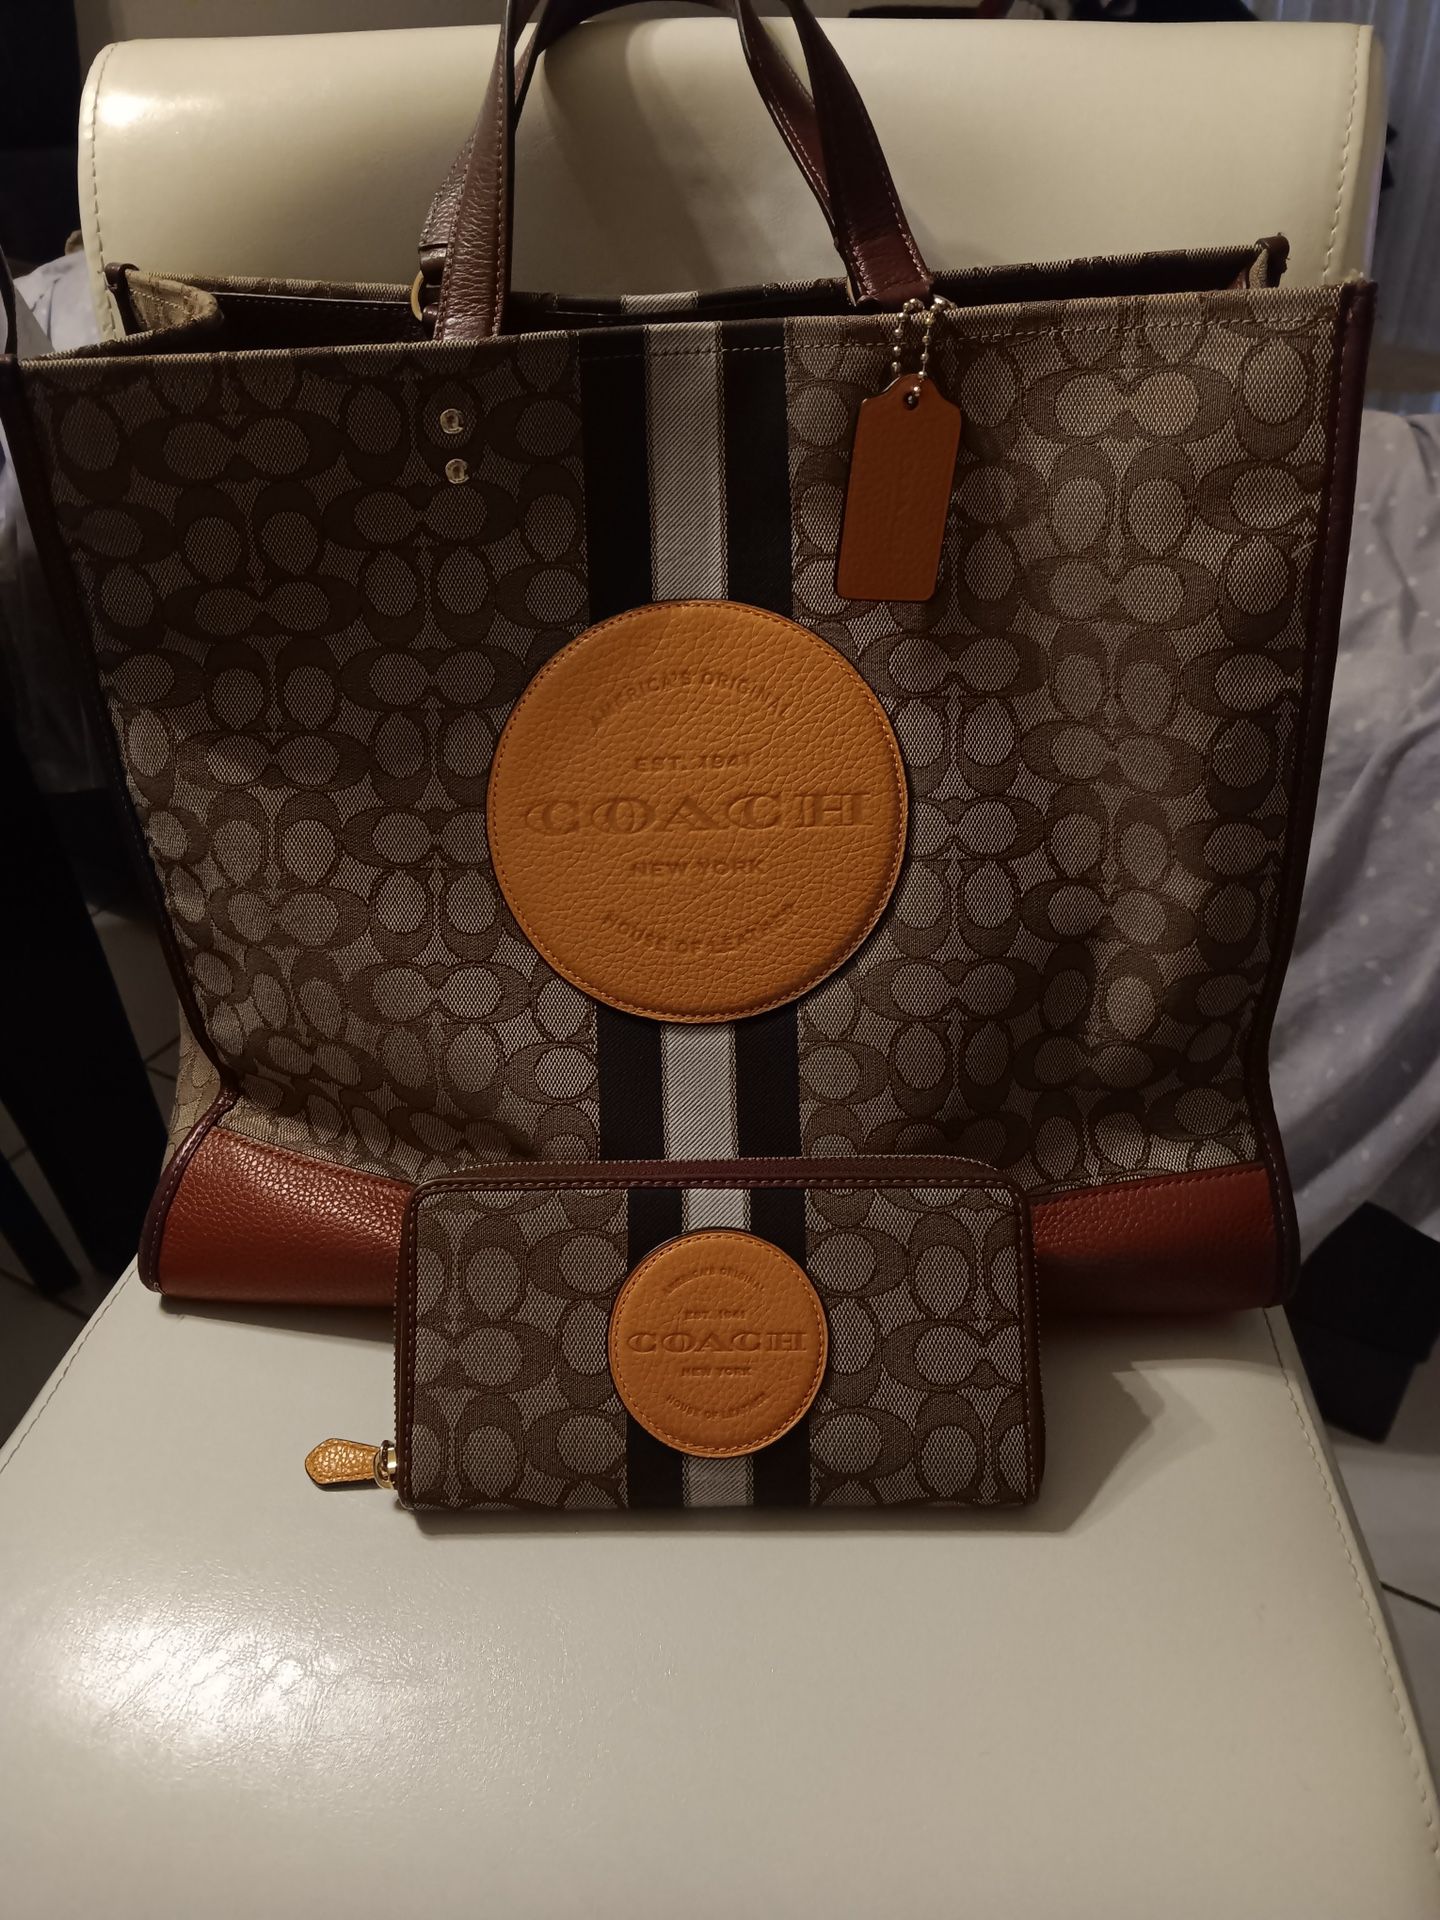 Authentic Coach Purse And Wallet For $300 Obo